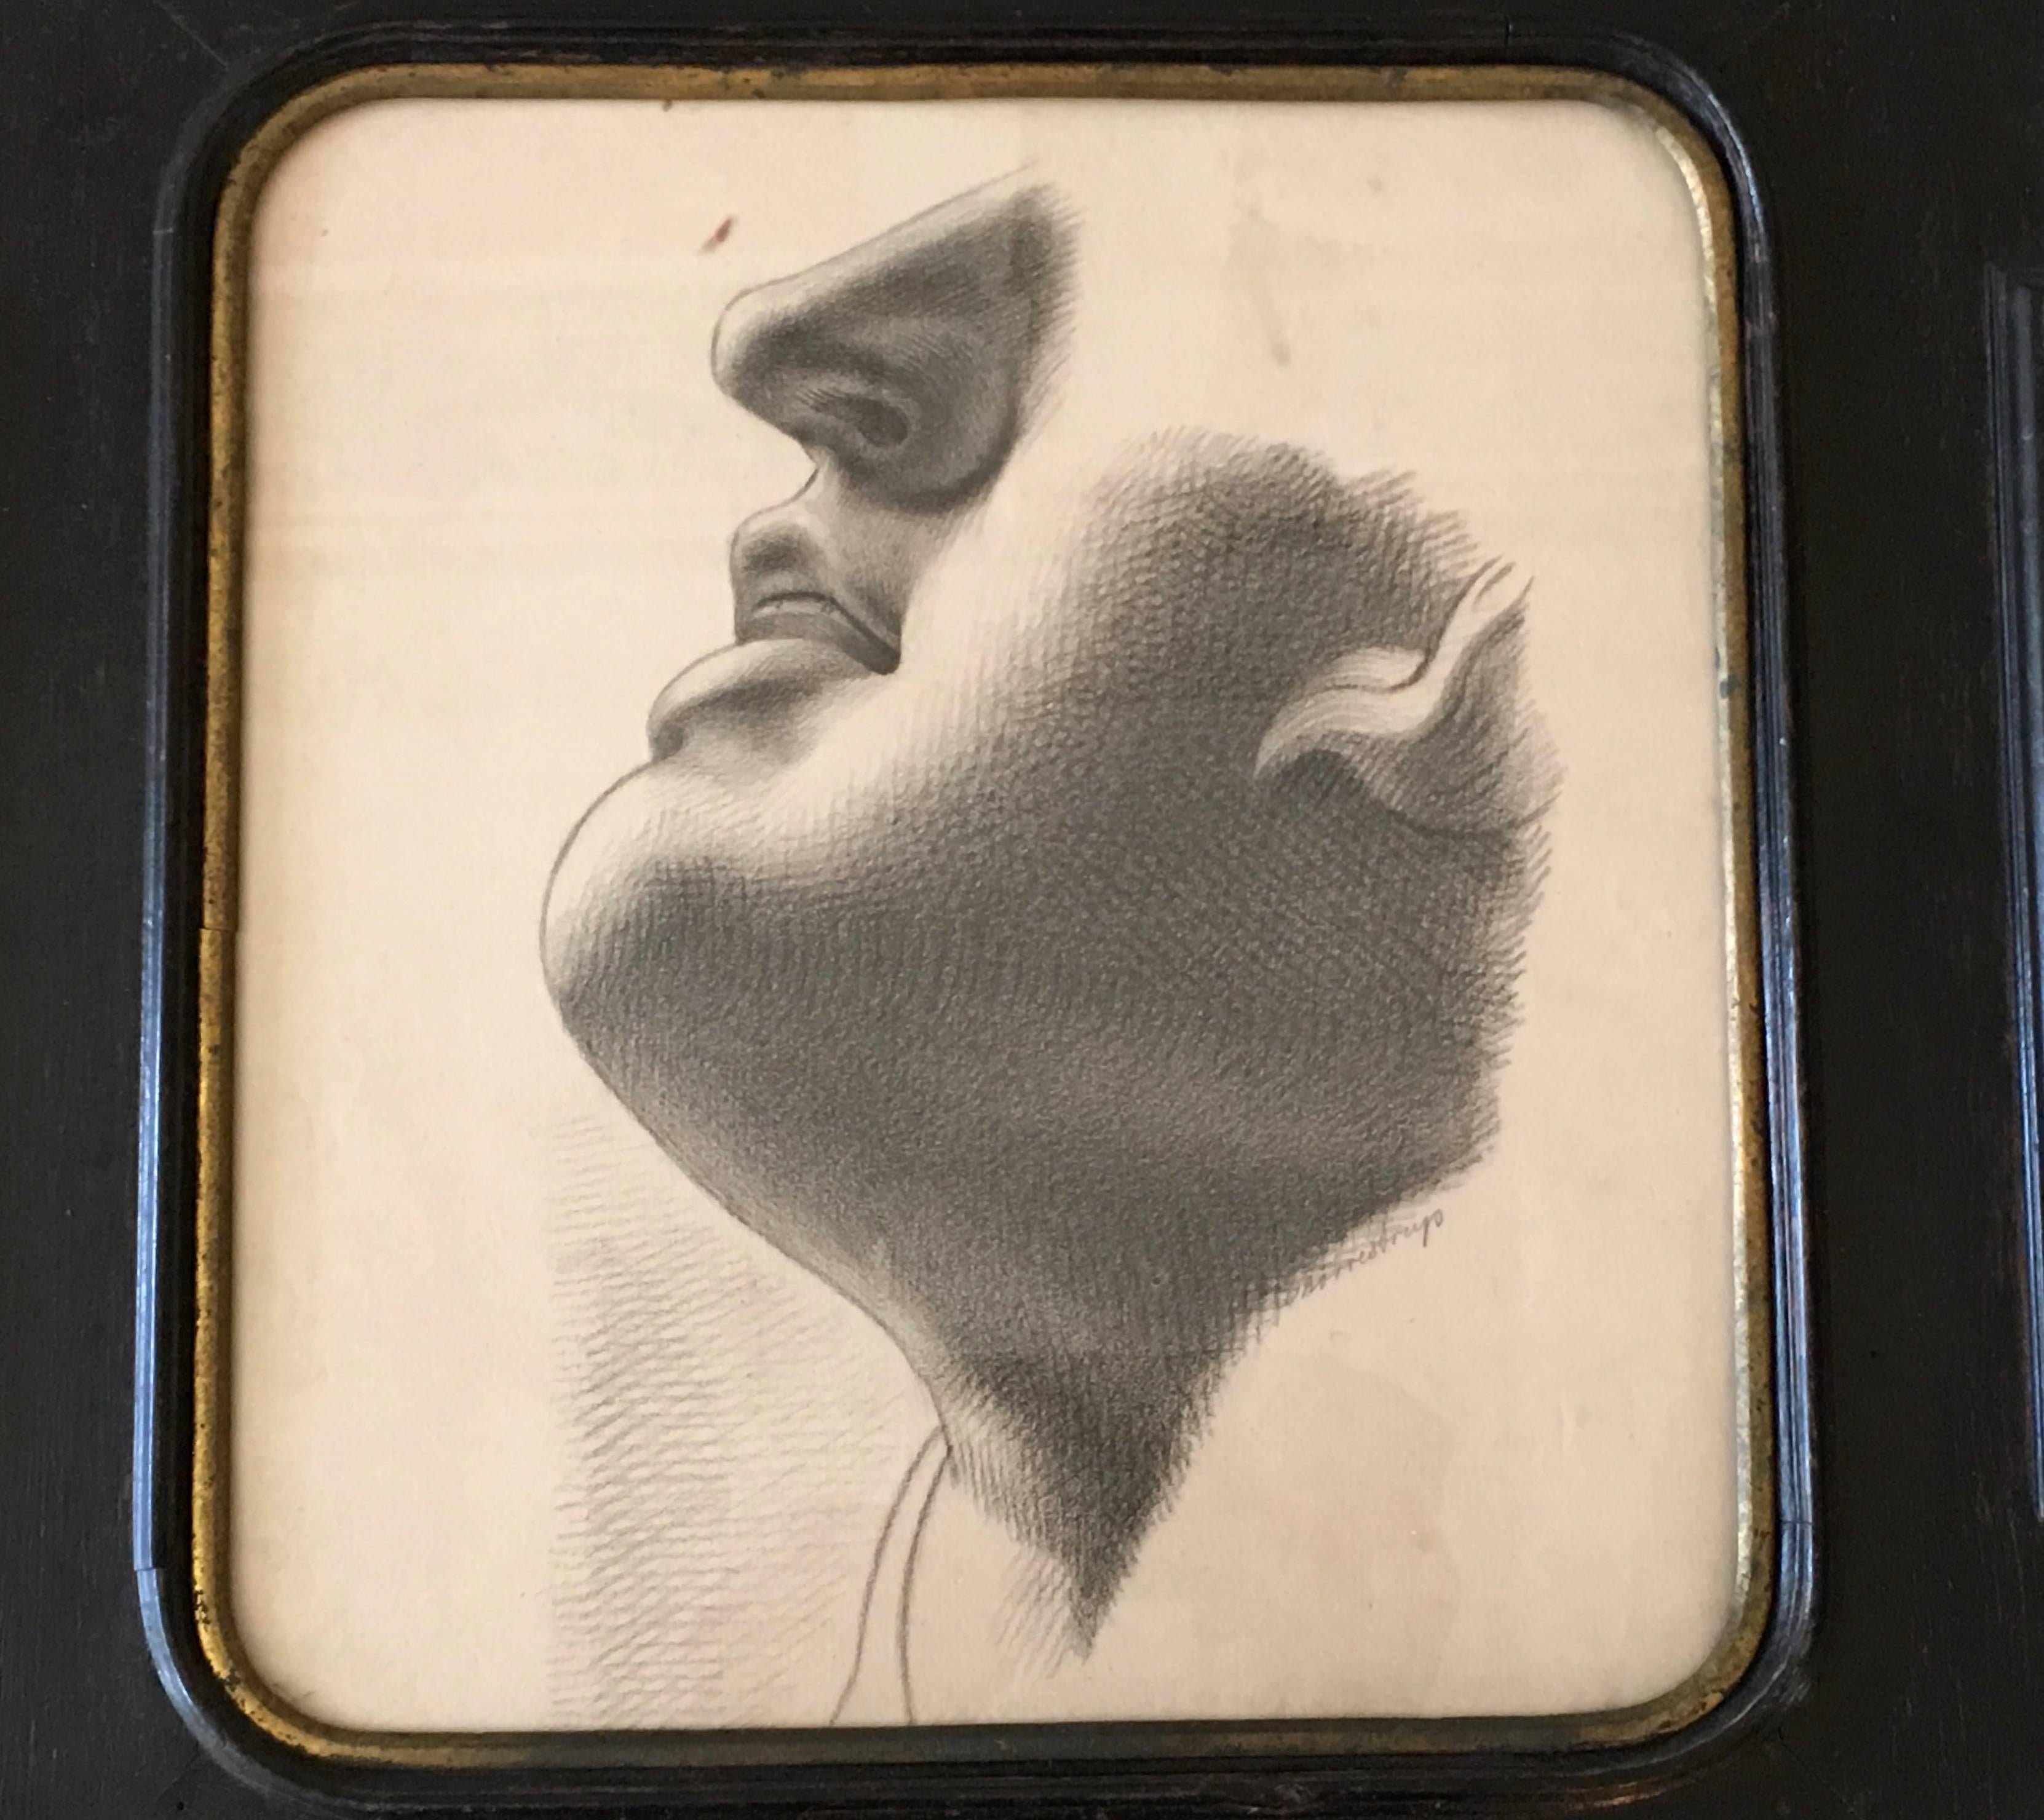 A beautifully rendered European, probably Danish, academic neoclassical charcoal drawing, of a face, likely a study of classical sculpture in its original fine quality ebonized wood frame with gilded fillet and original glass. Signed. 
